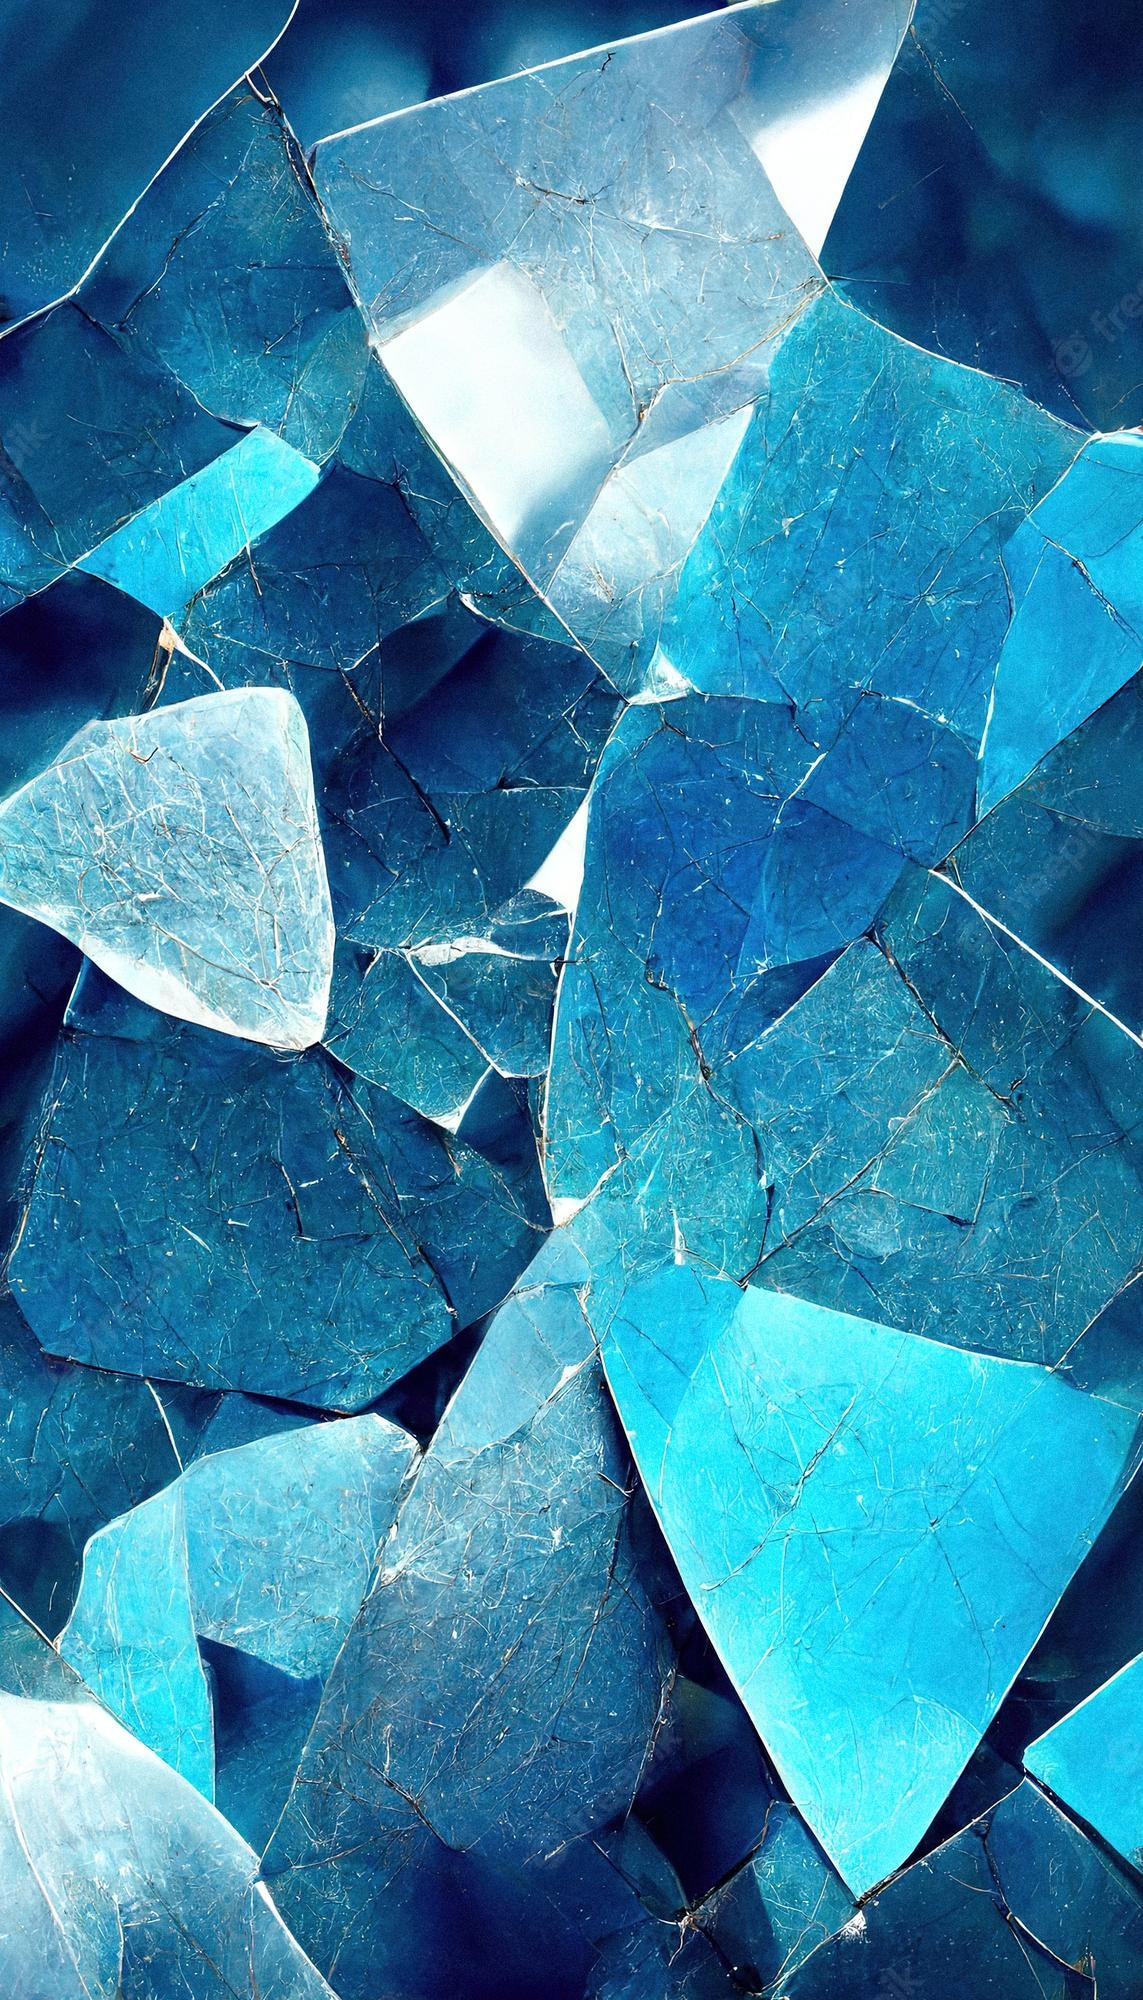 Premium Photo. Illustration of a blue shattered glass or ice crystals background or wallpaper texture cold blue